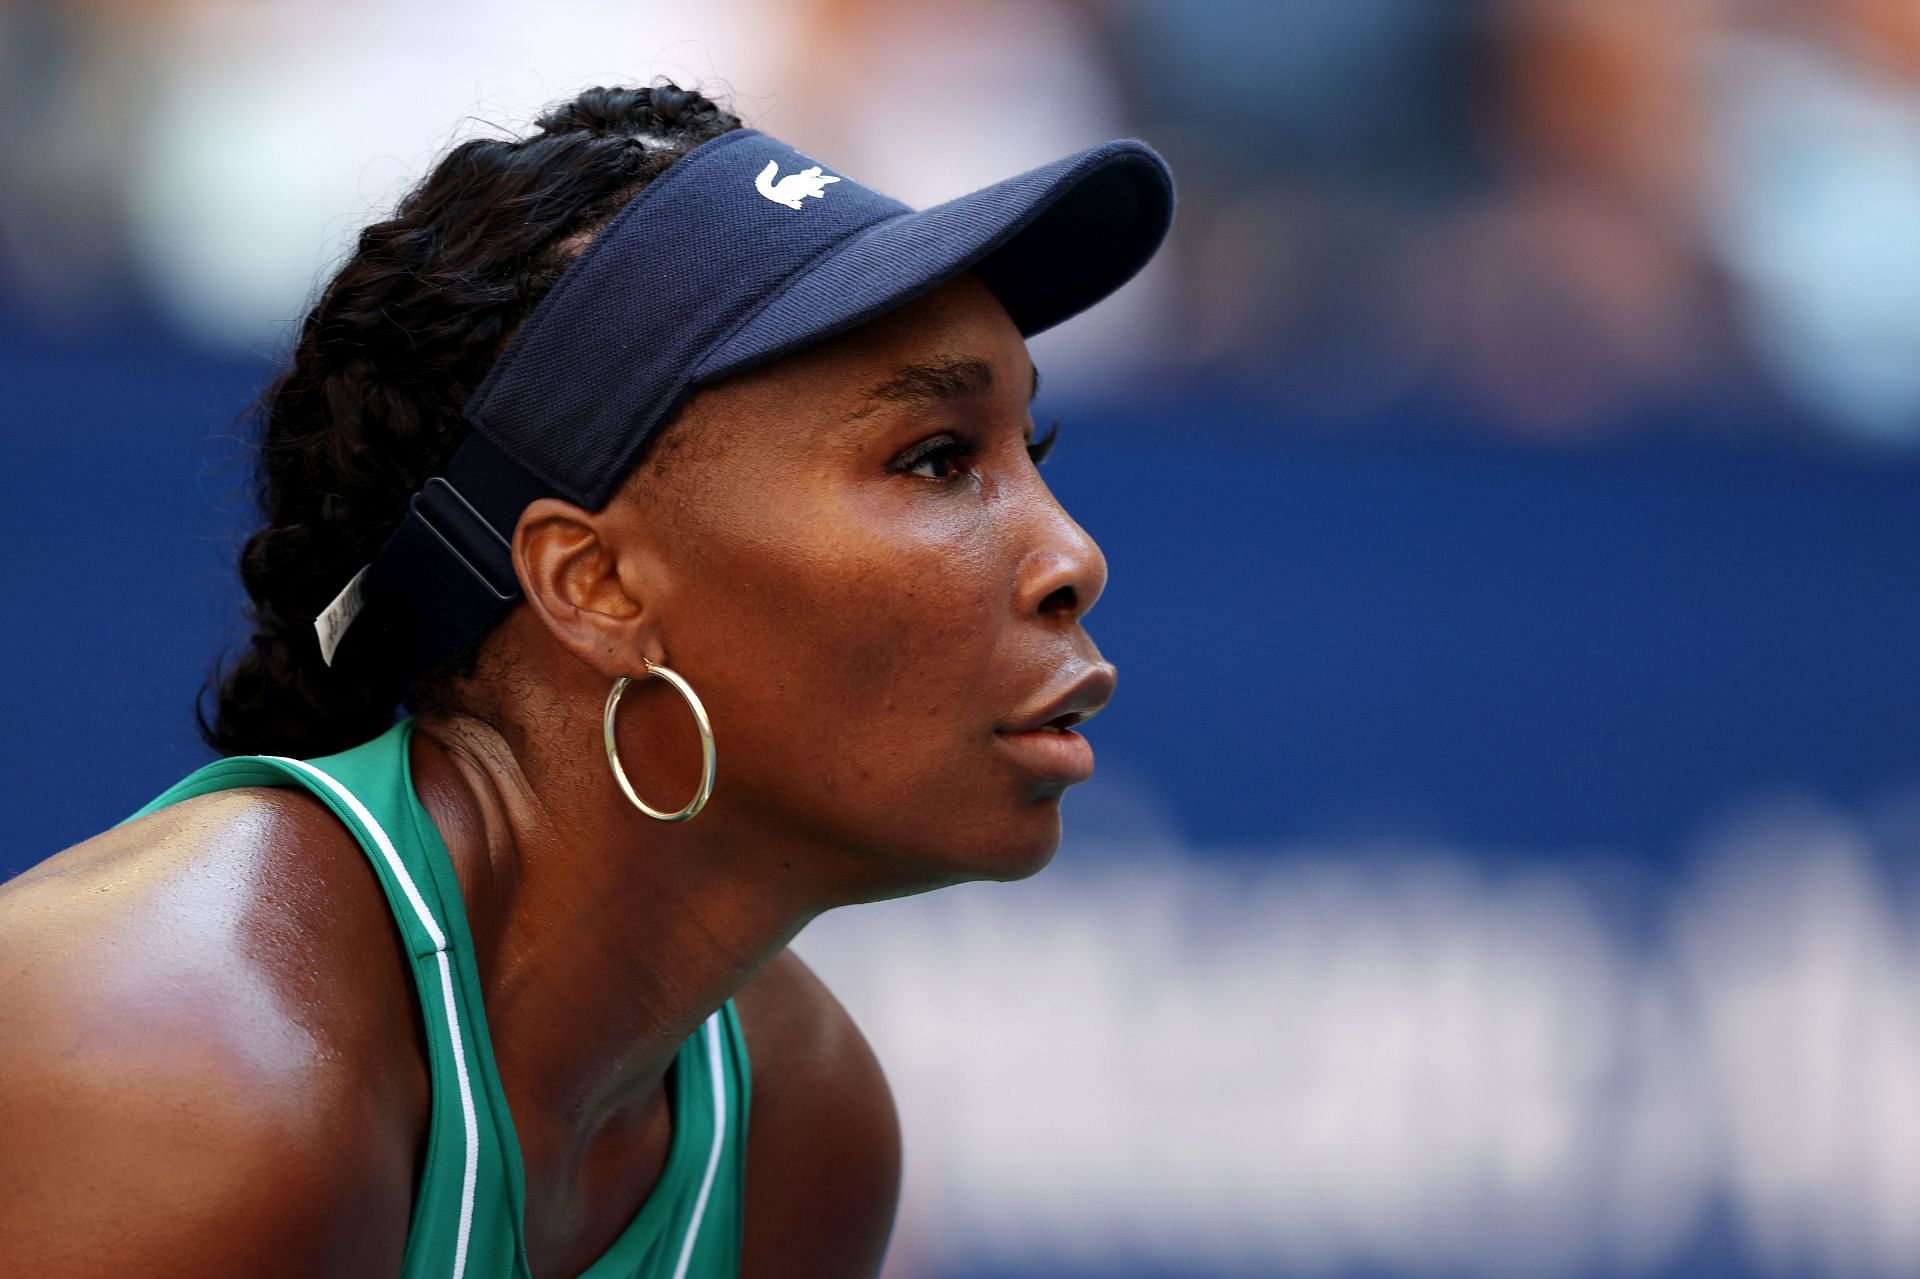 Williams in action, Photo by Jamie Squire/Getty Images